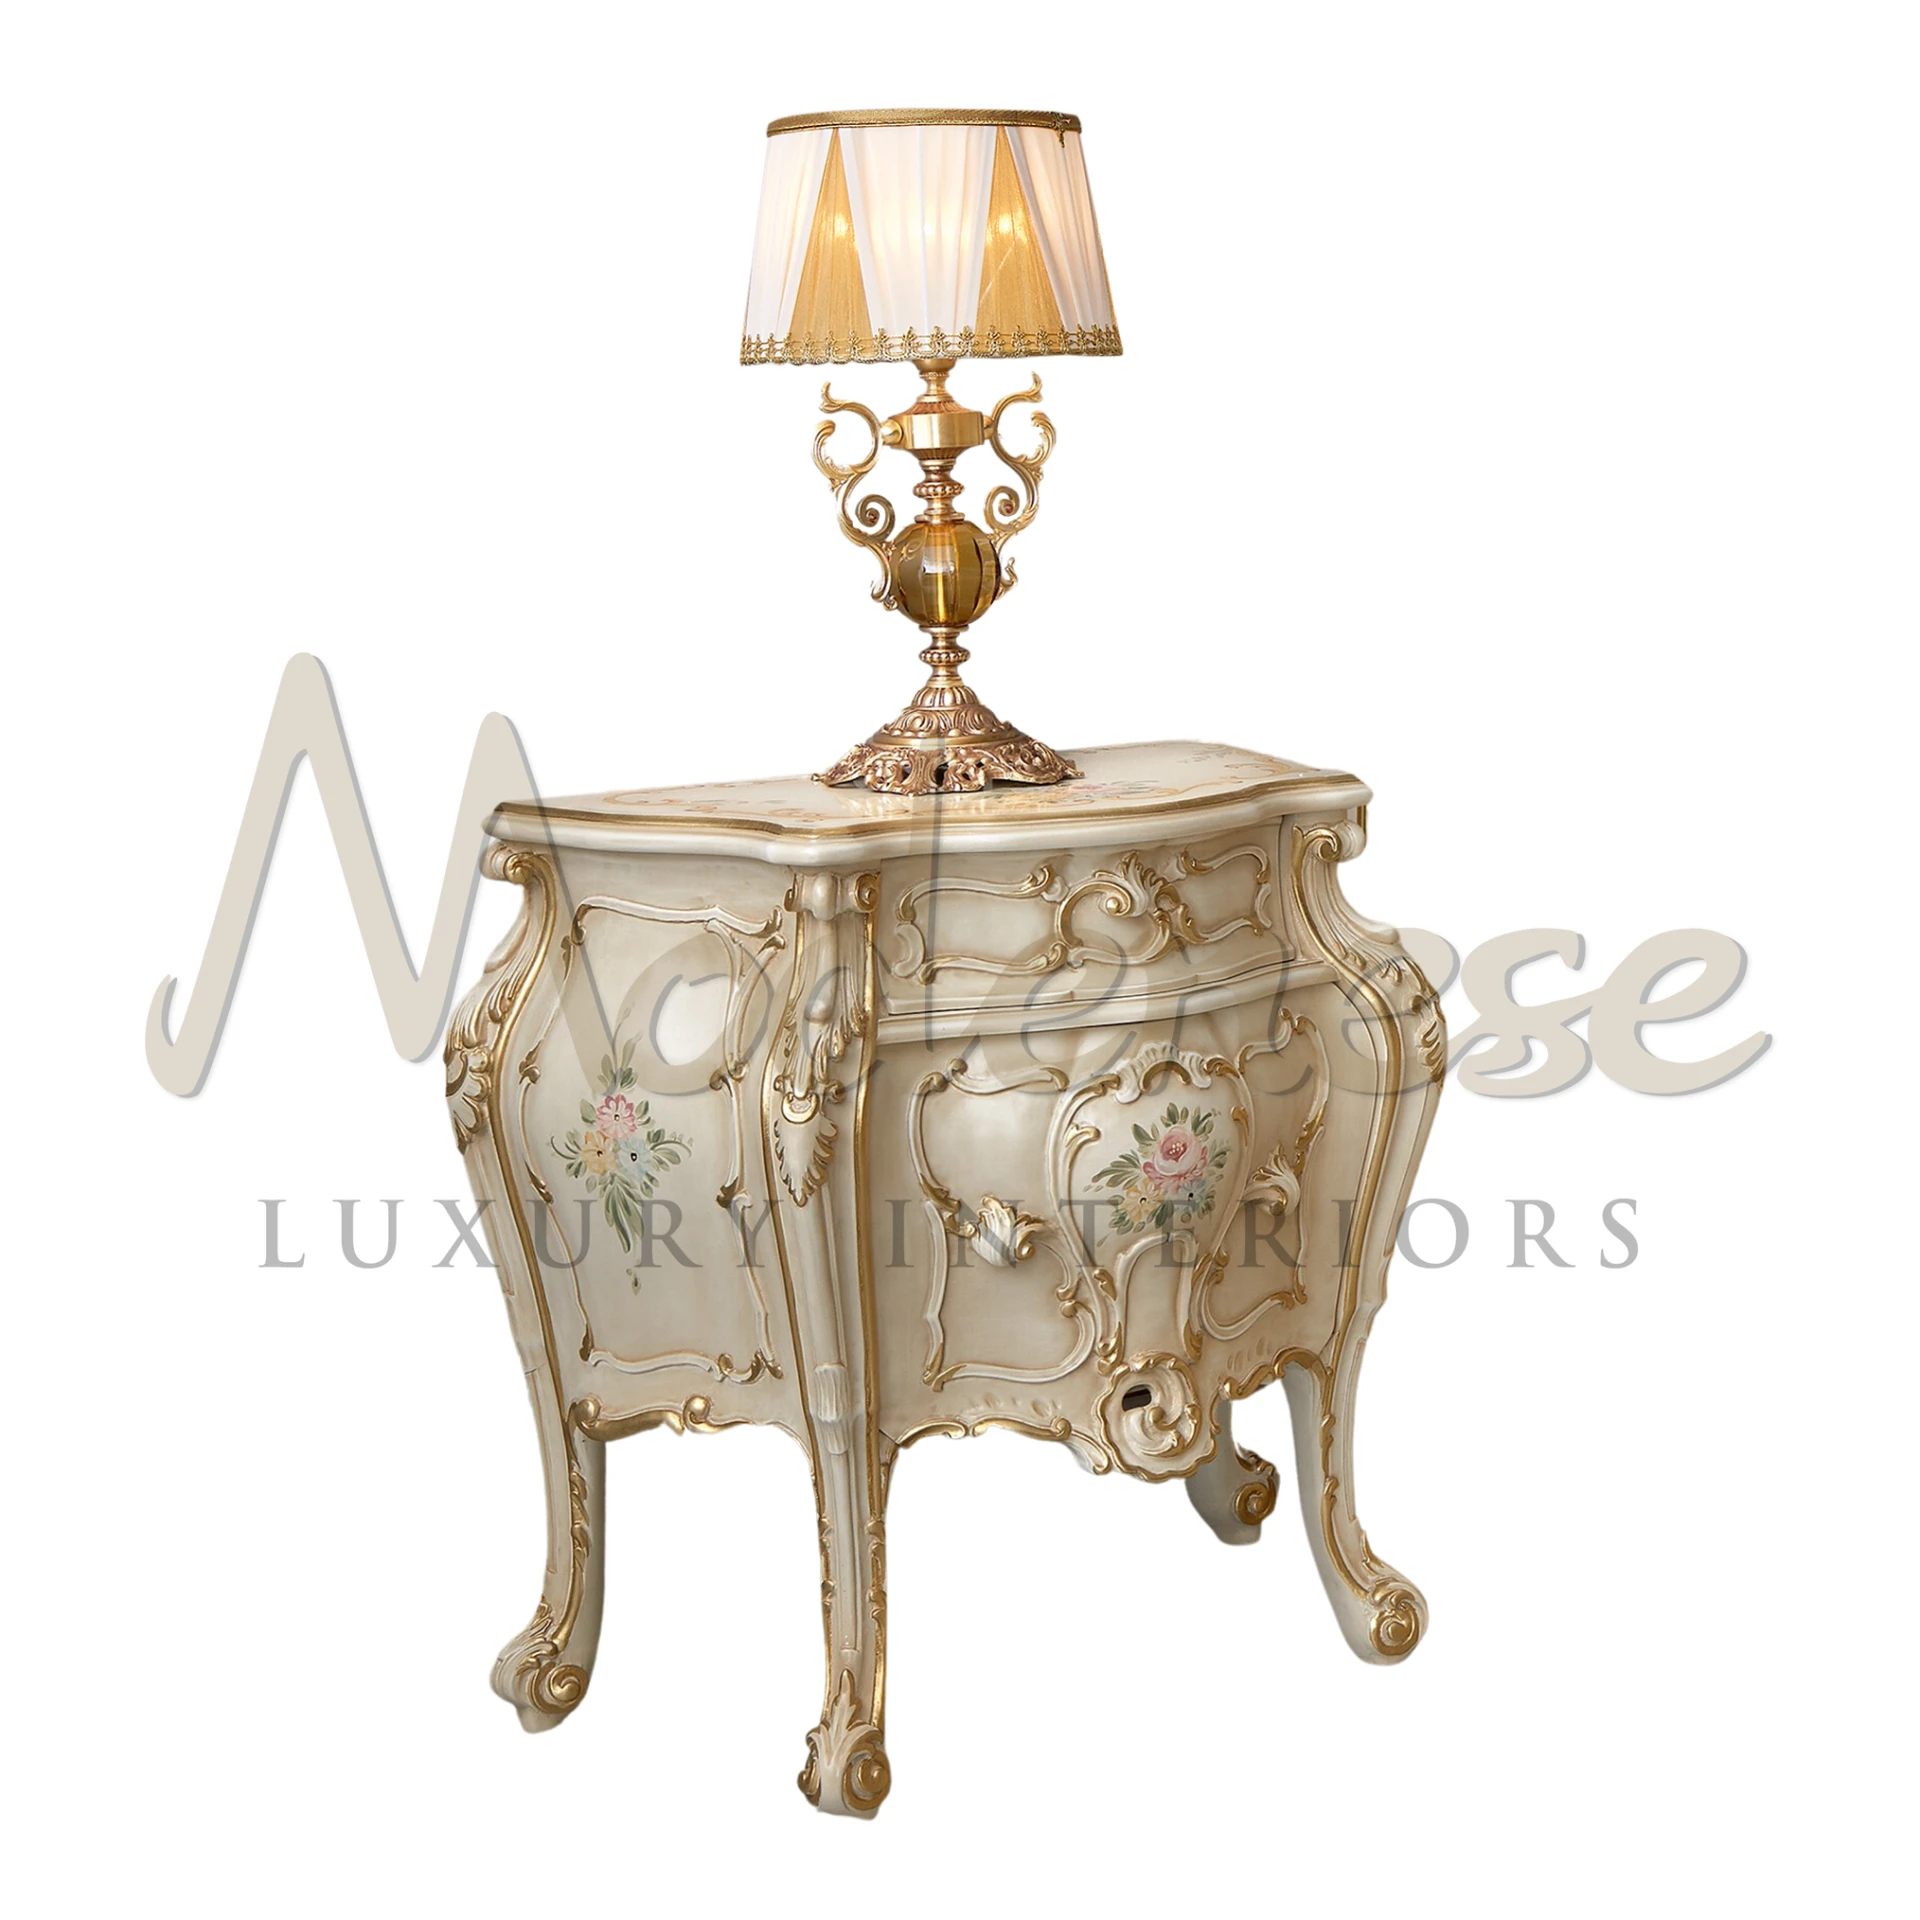 Timeless elegance meets practicality in this finely crafted bedside companion. With its sturdy construction and sleek design, it adds a touch of sophistication to any bedroom decor.